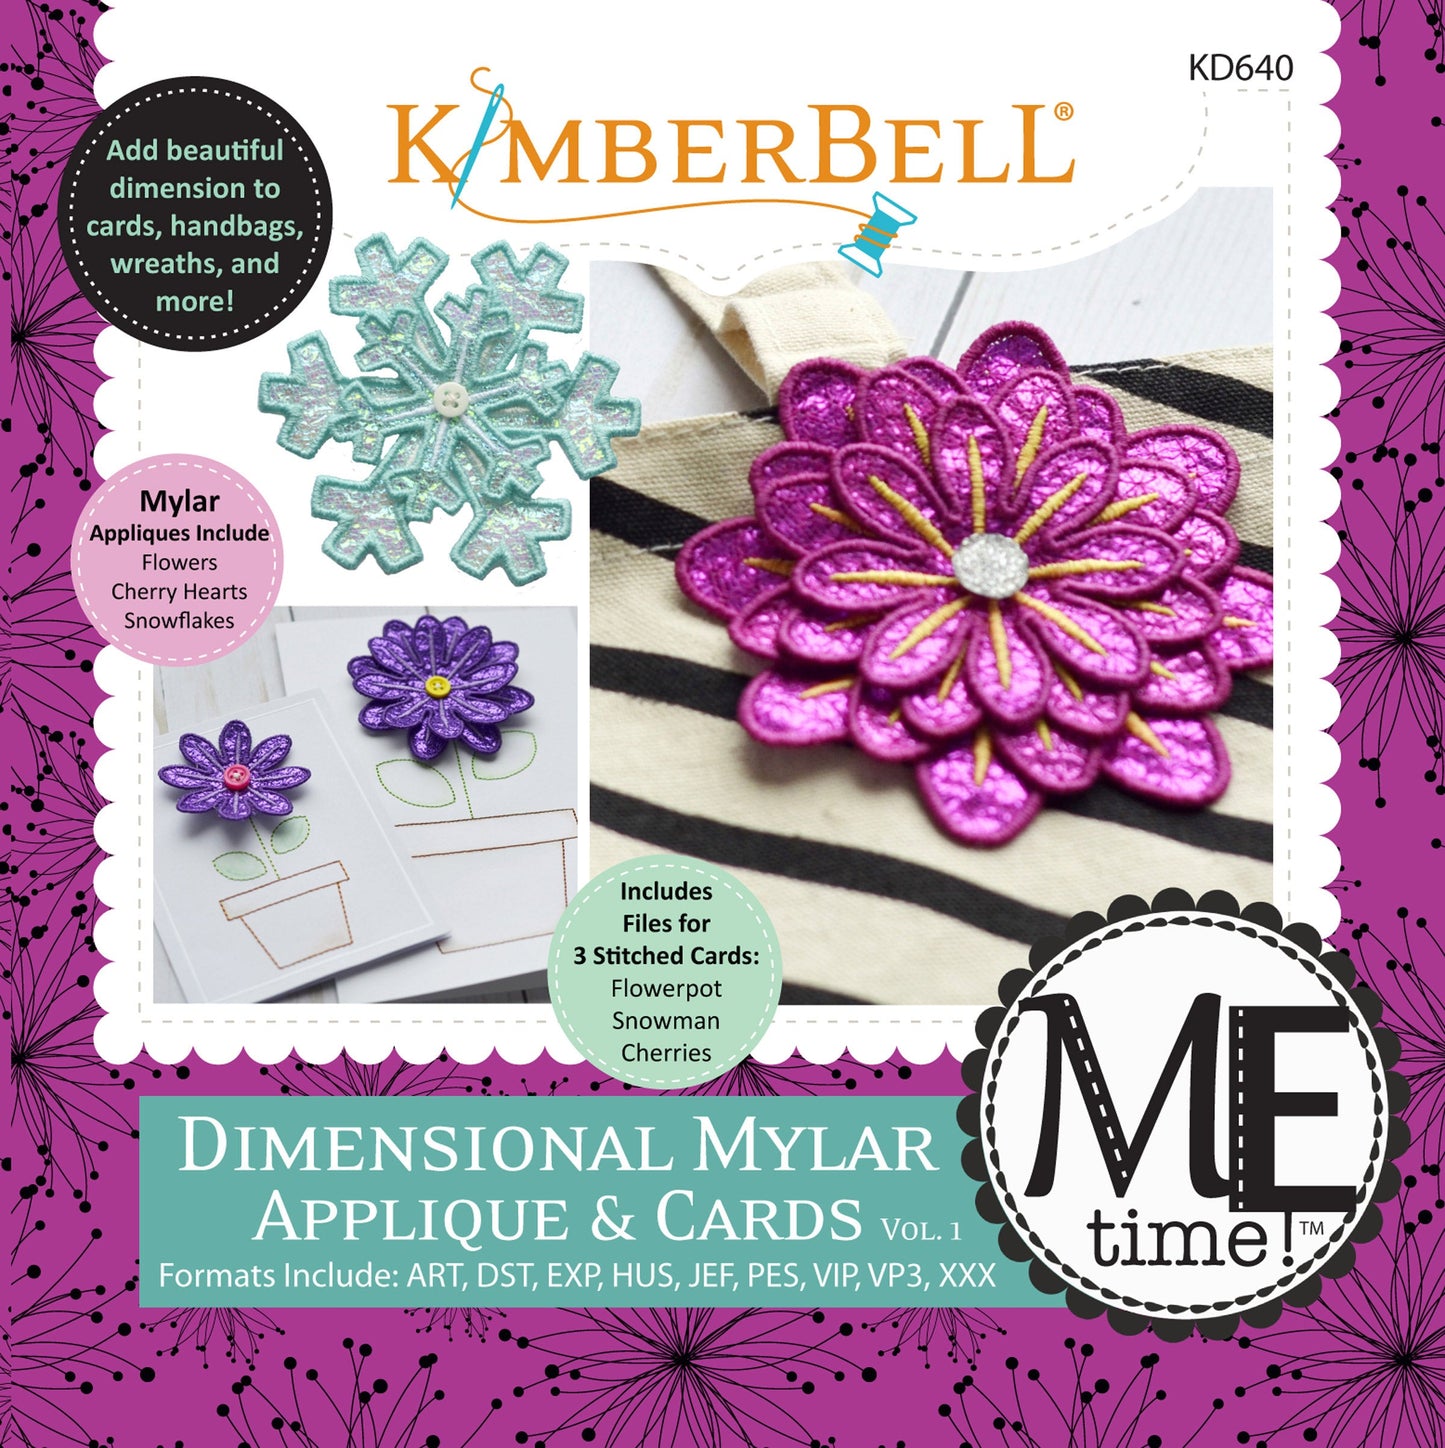 Dimensional Mylar Applique & Cards Kd640 Sewing Patterns